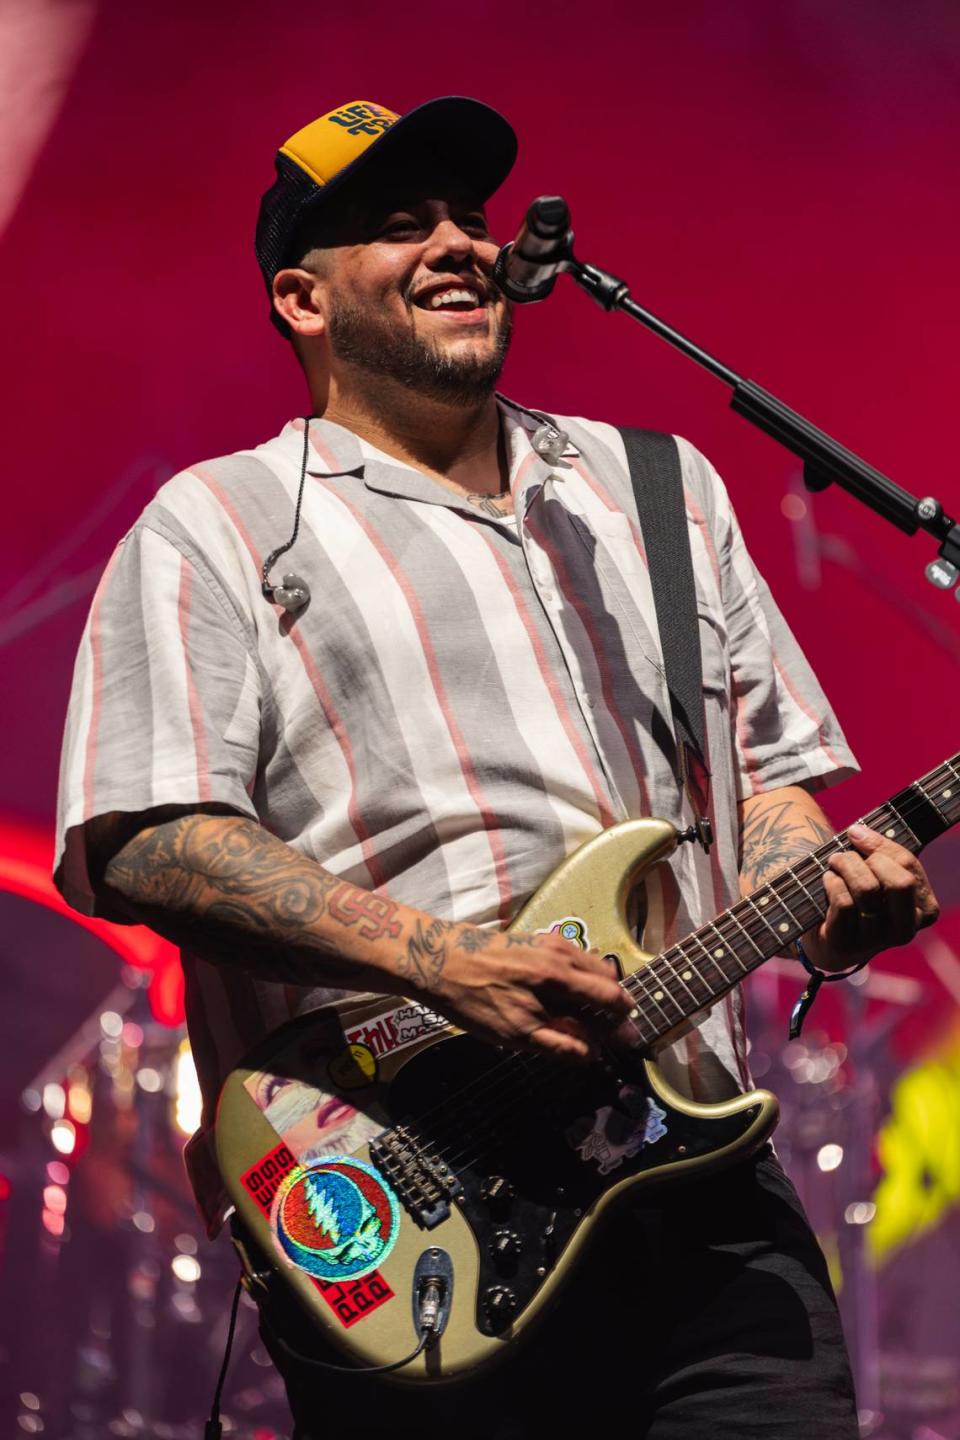 Reggae and ska band Sublime and musician Rome Ramirez — best known for the song “Santeria” — will visit San Luis Obispo County as part of its final year of performances, performing Friday, July 18 at 7:30 p.m. in the Chumash Grandstand Area.